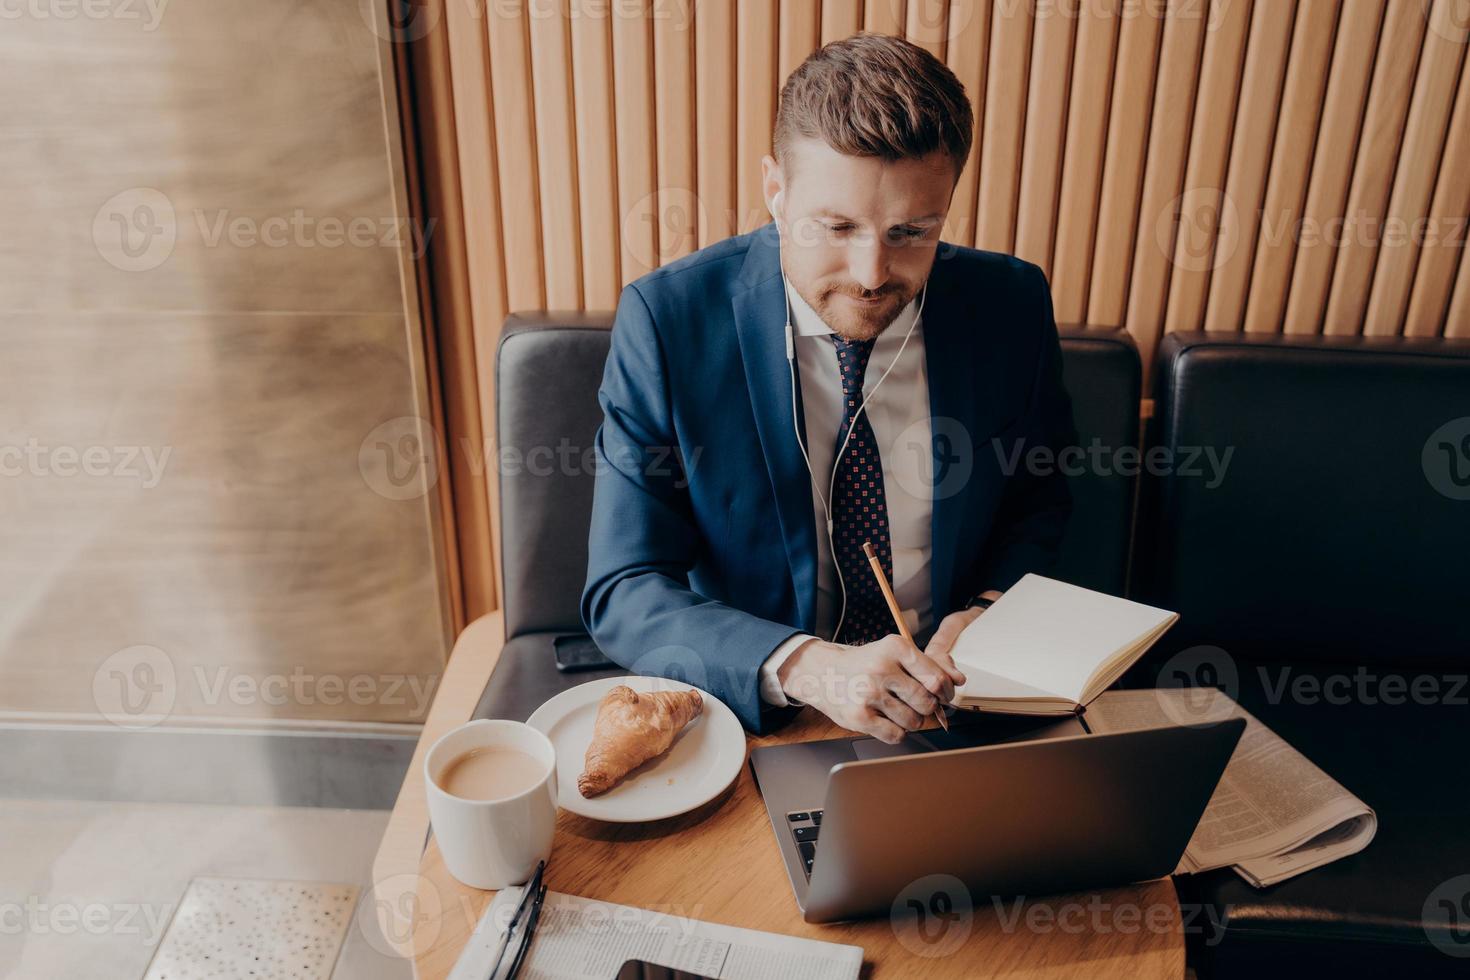 Male business executive watching webinar on laptop in restaurant photo